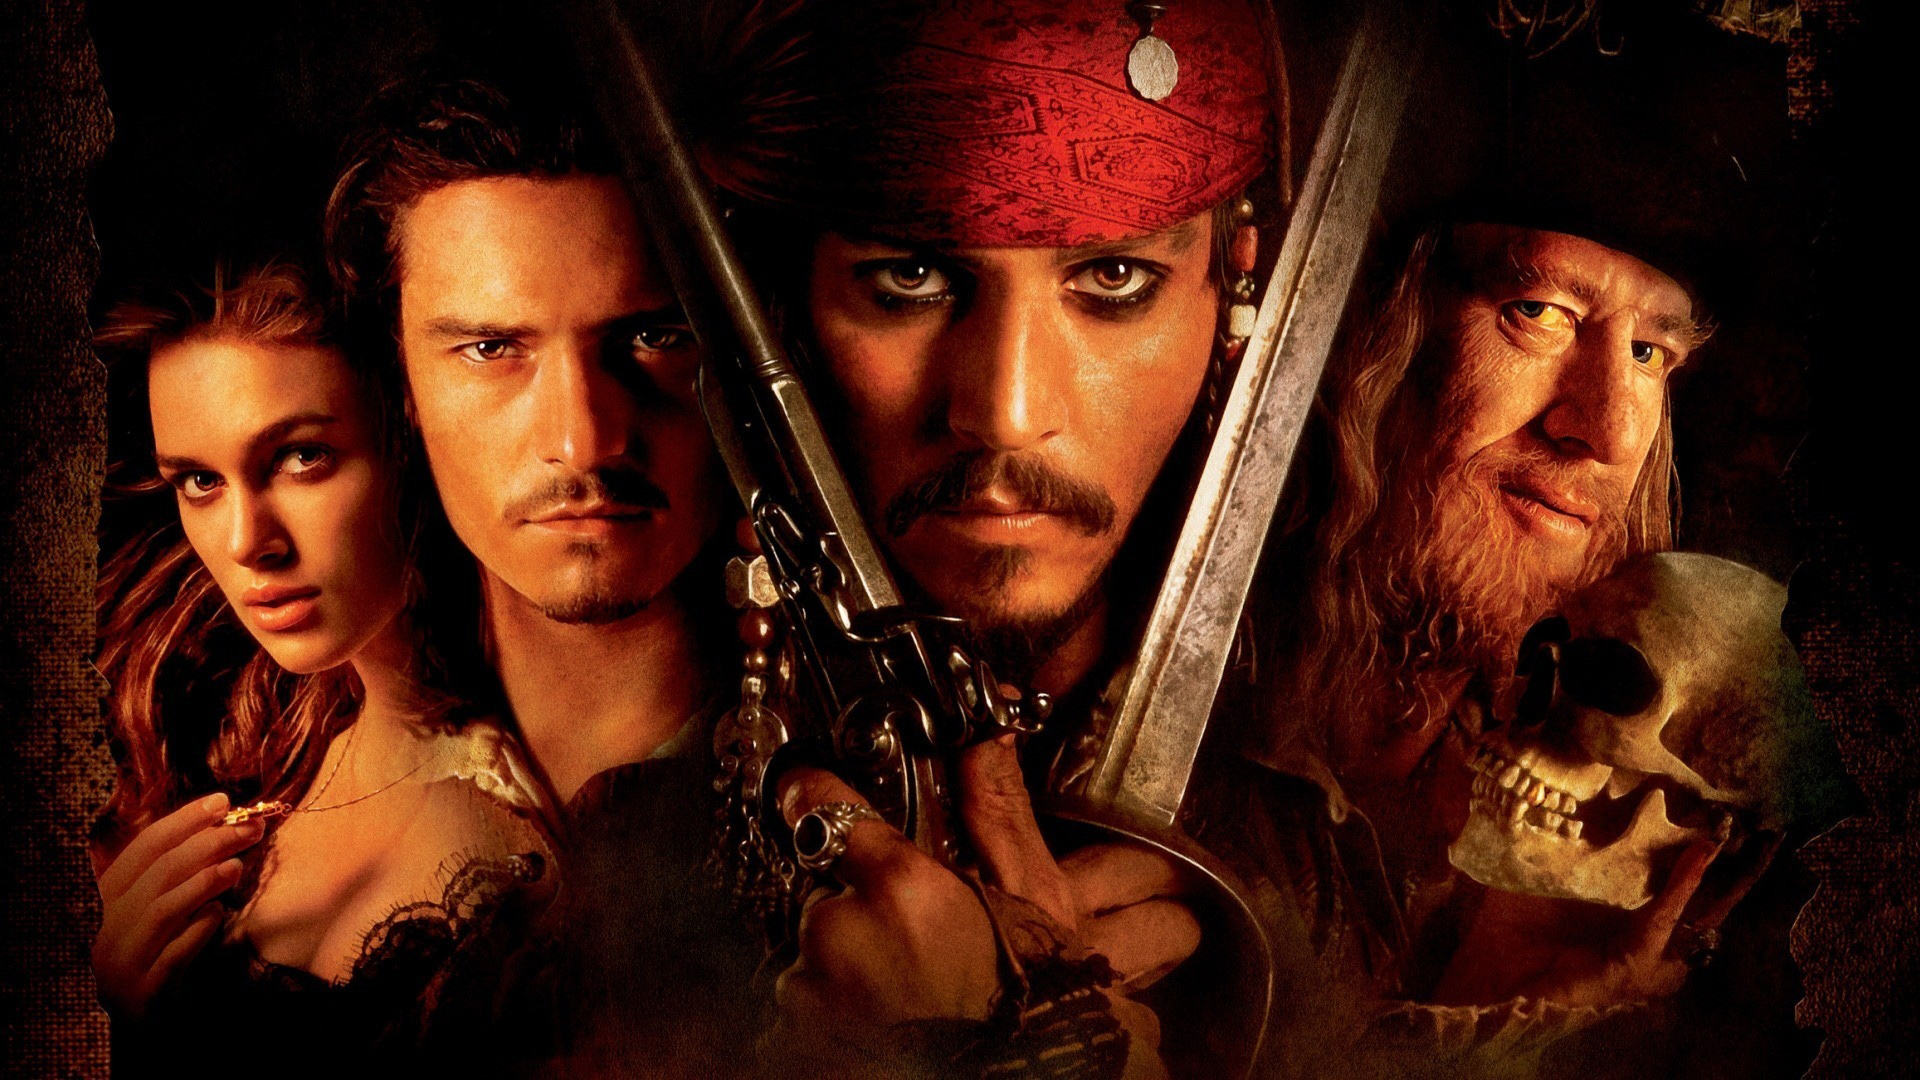 elizabeth swann, pirates of the caribbean: the curse of the black pearl, jack sparrow, pirates of the caribbean, johnny depp, movie, geoffrey rush, hector barbossa, keira knightley, orlando bloom, will turner 1080p